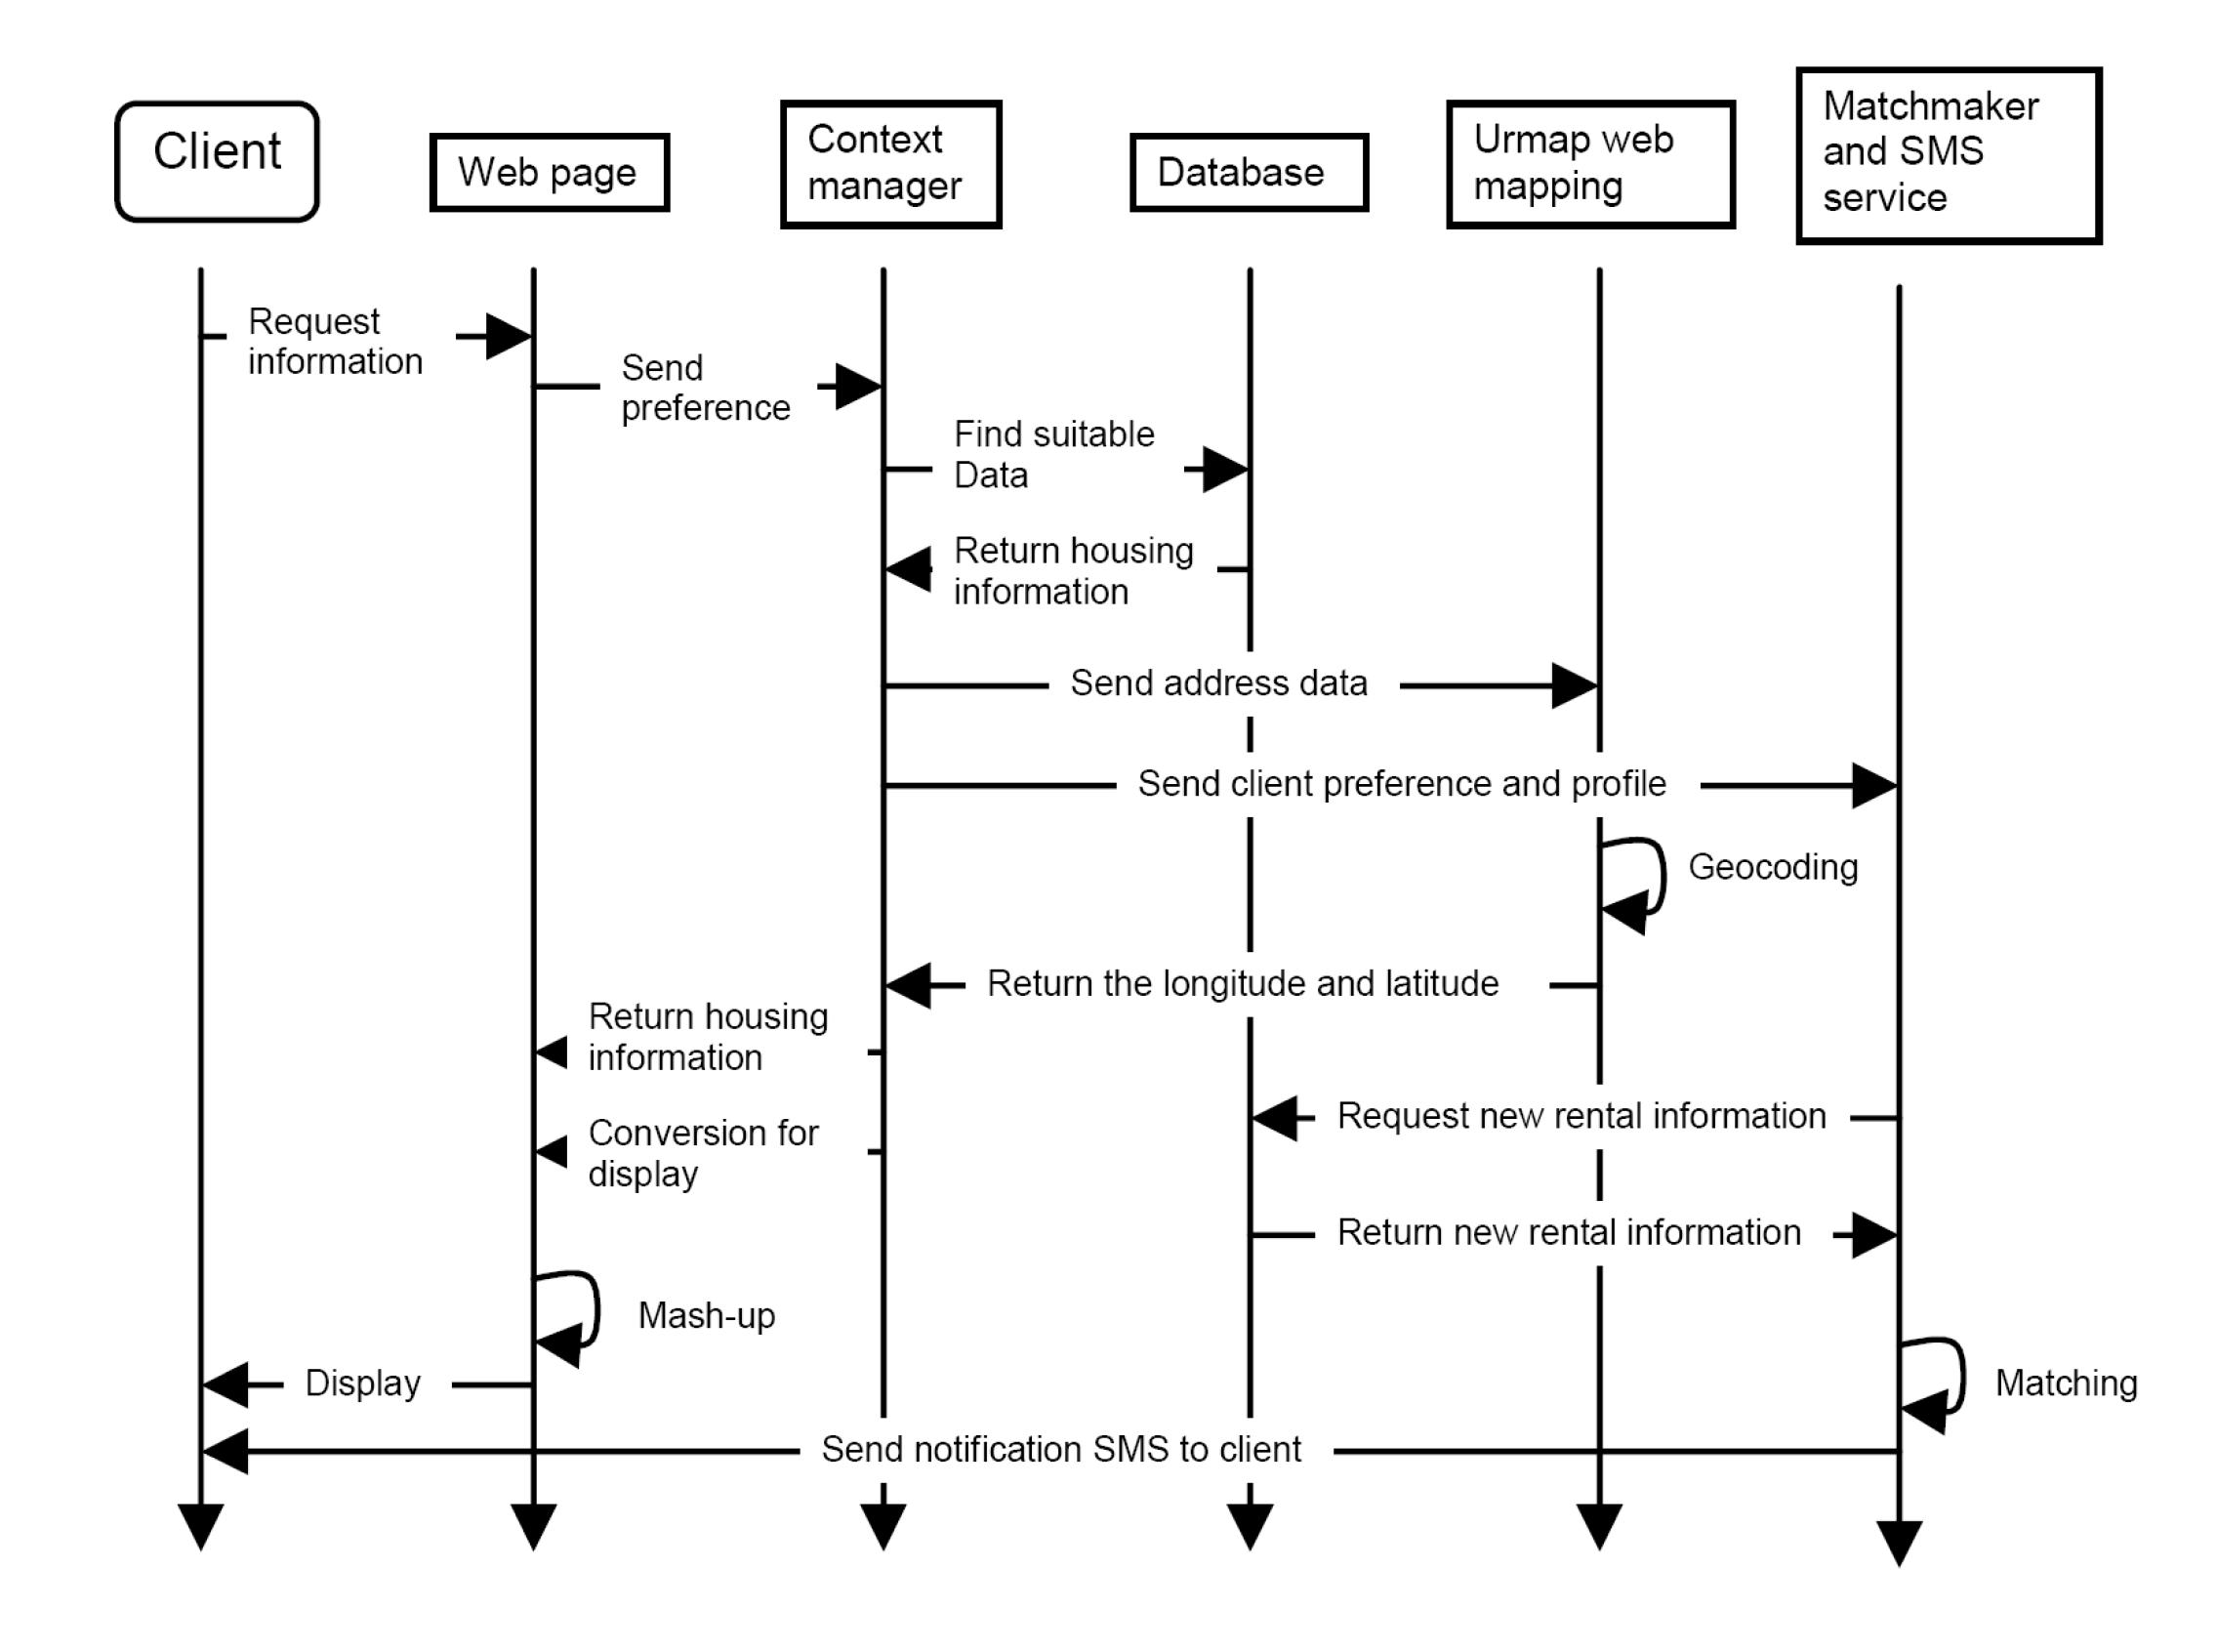 Figure 2. Sequence diagram showing the interactions between system components along the axis of time